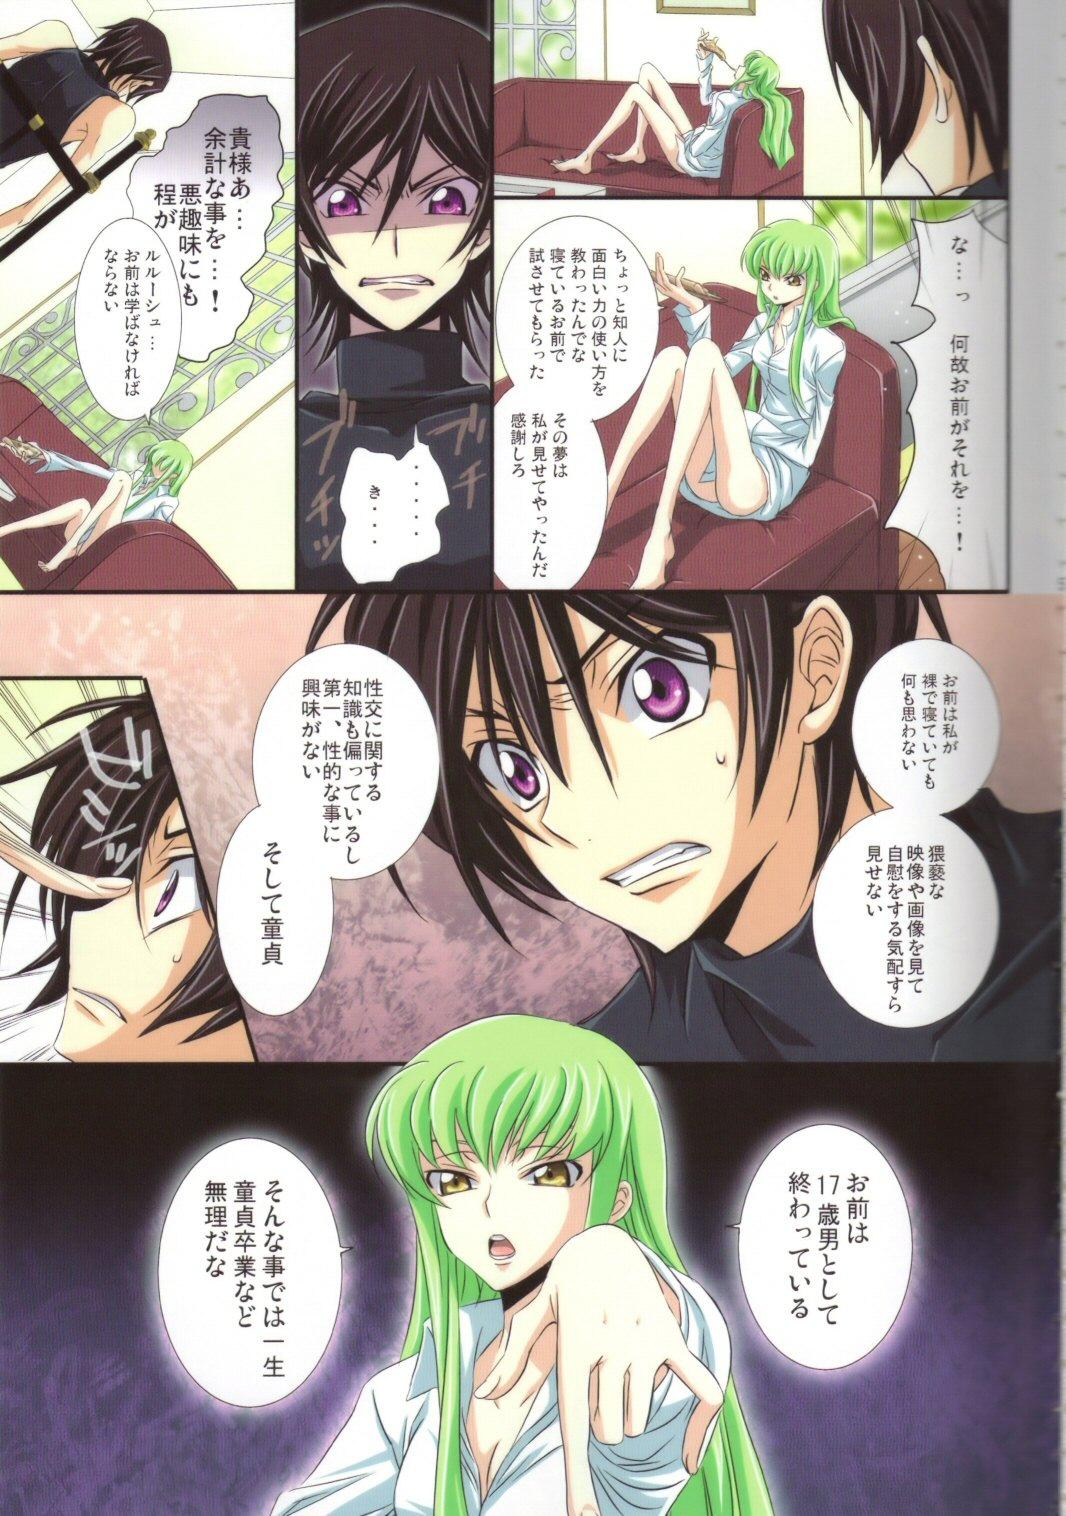 Stripping on・non・om - Code geass Casa - Page 4